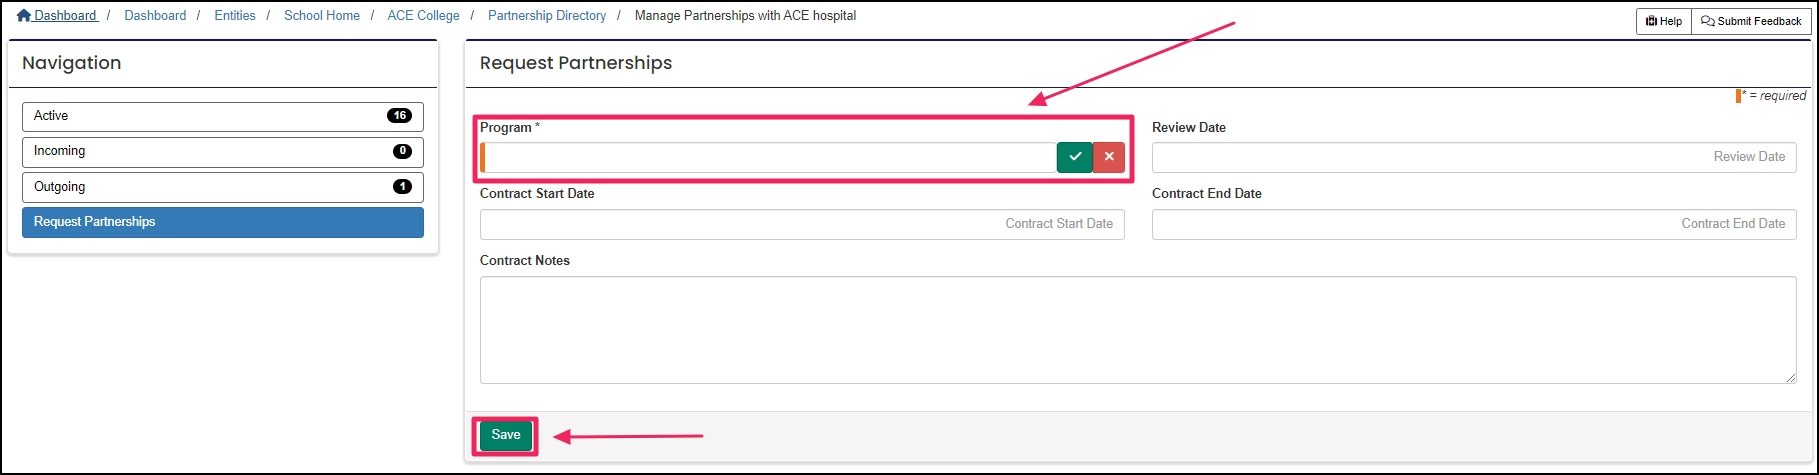 Image shows request partnerships form highlighting program field and save button.